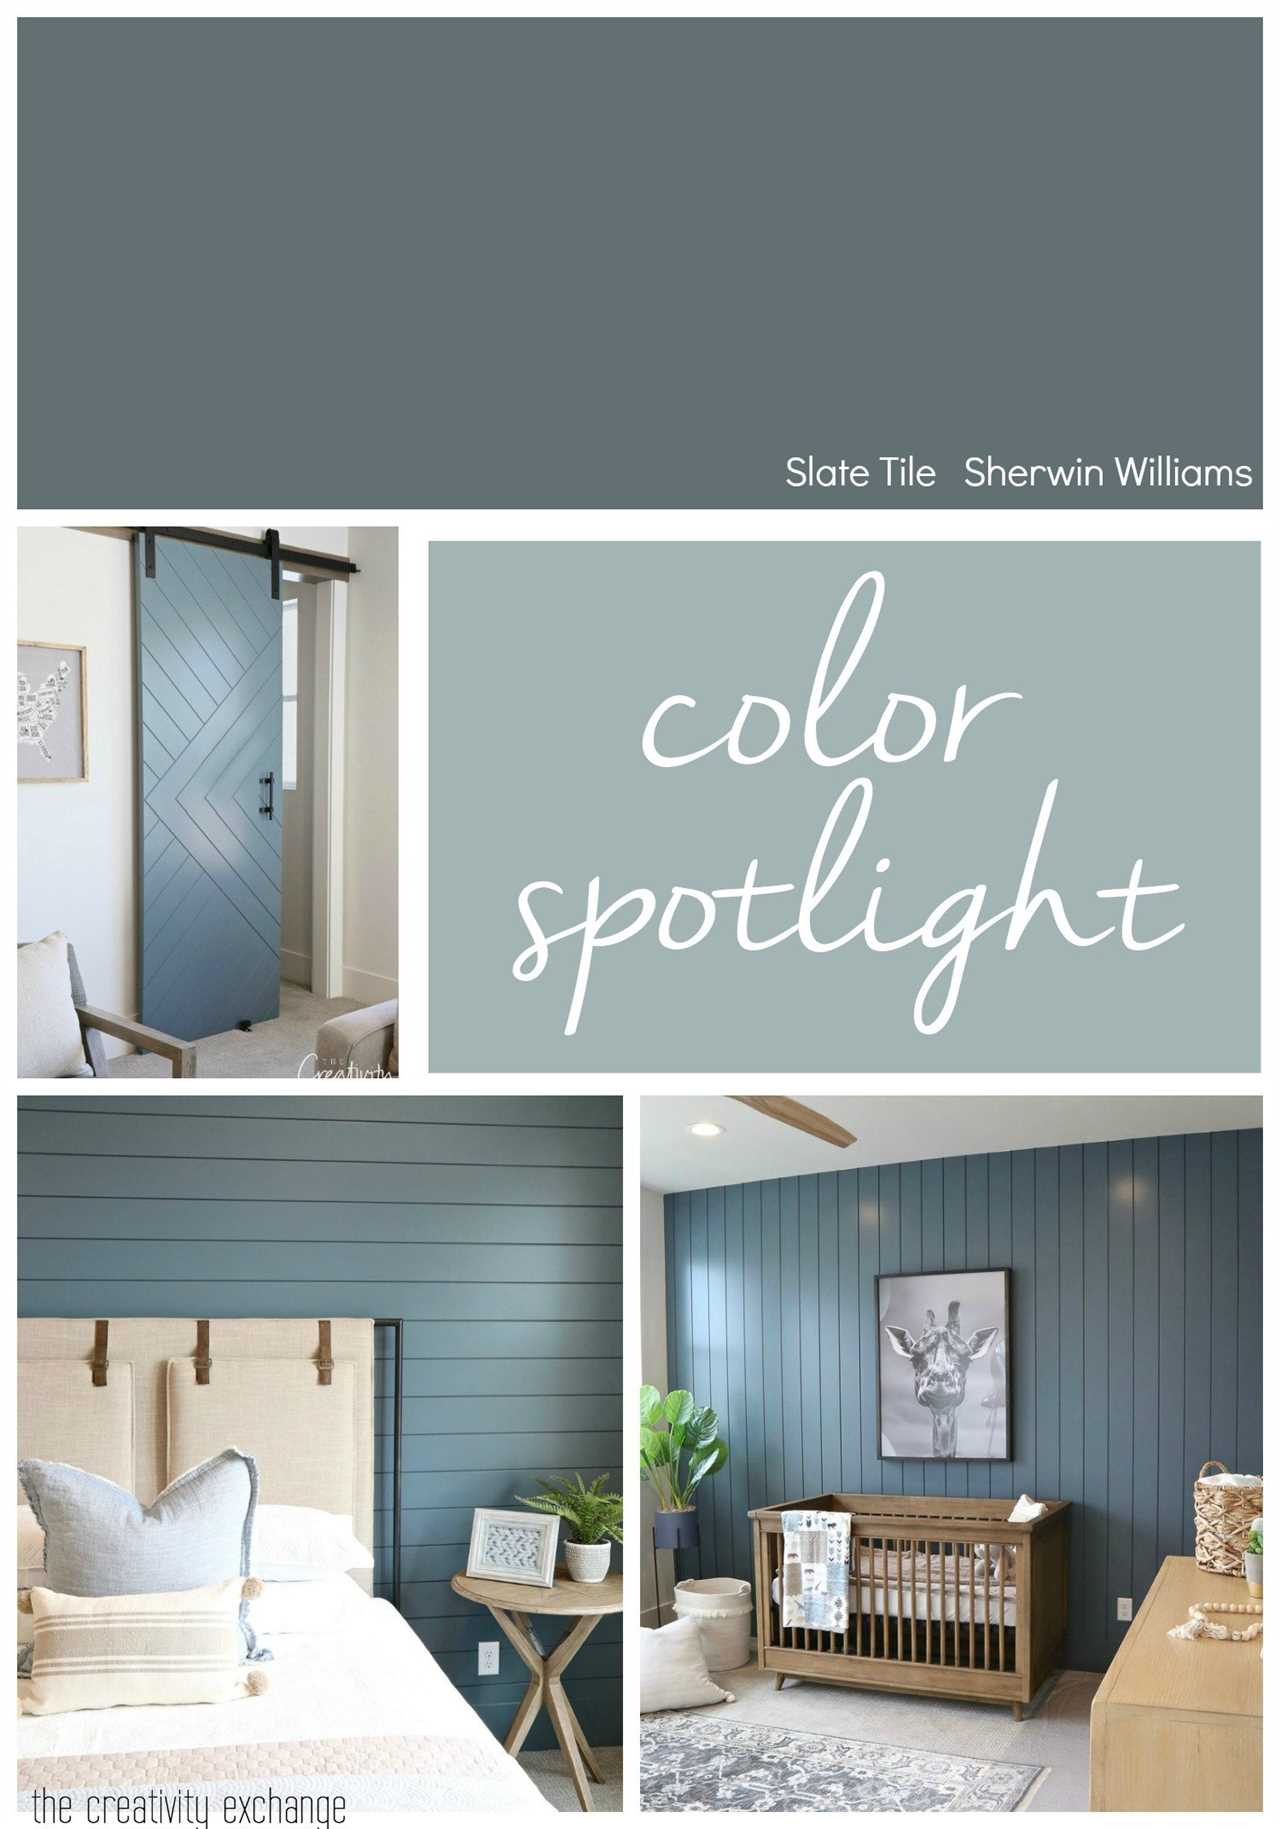 Discover the Beauty of Slate Tile with Sherwin Williams